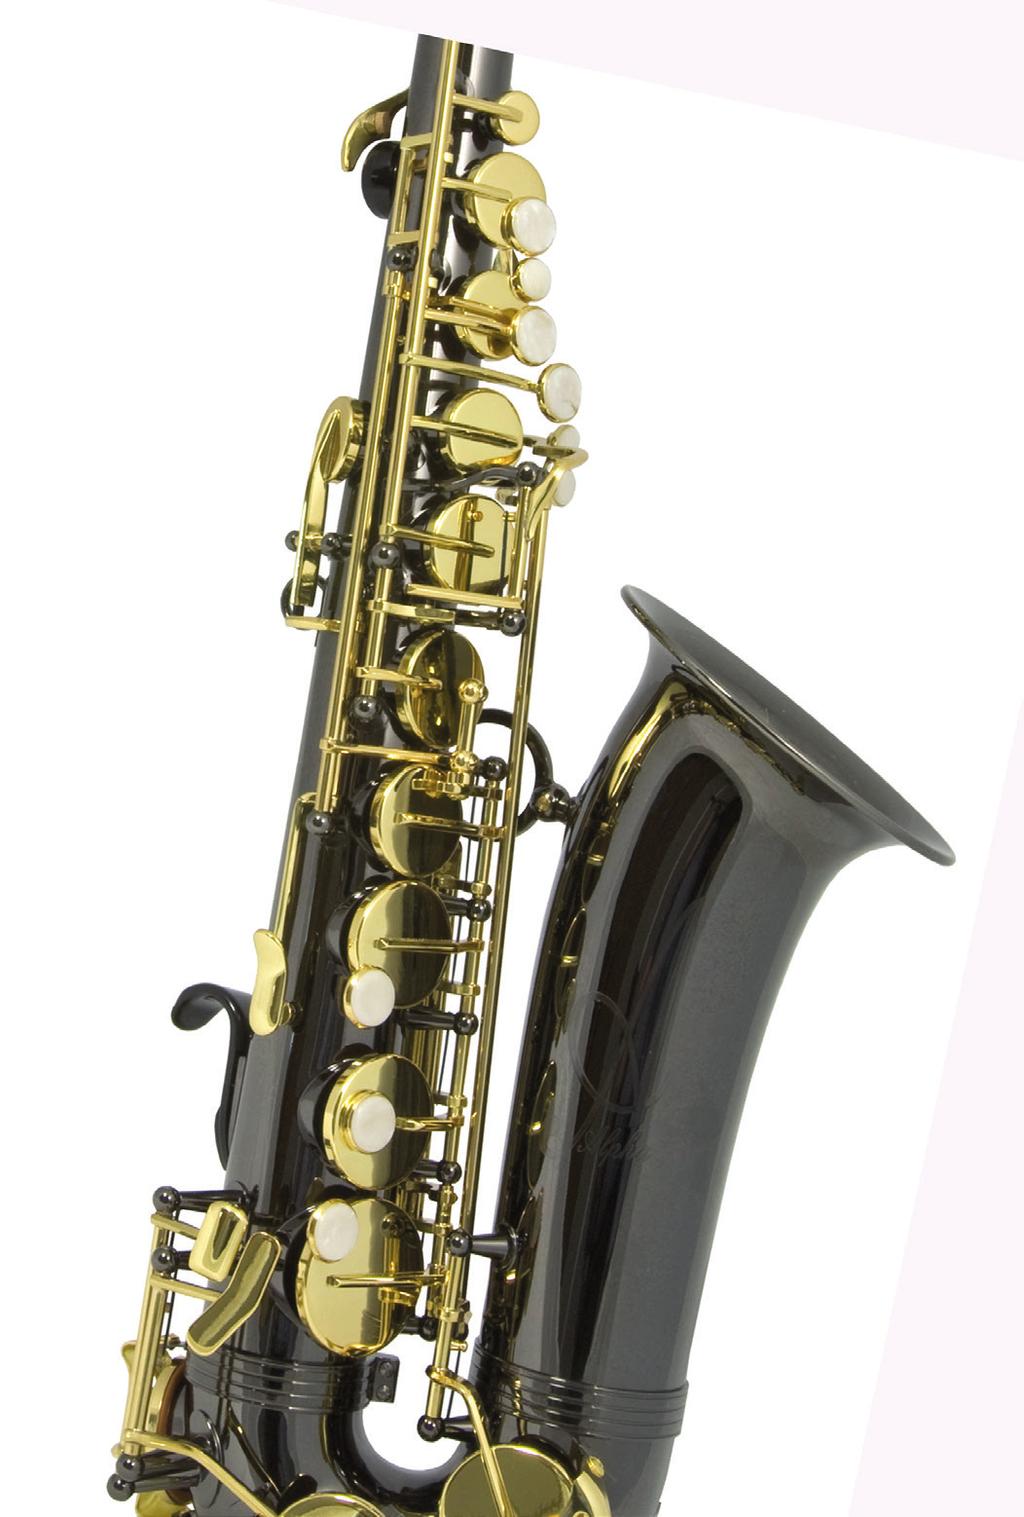 Compared to a traditional alto sax, the weight has been reduced by an amazing 33%.